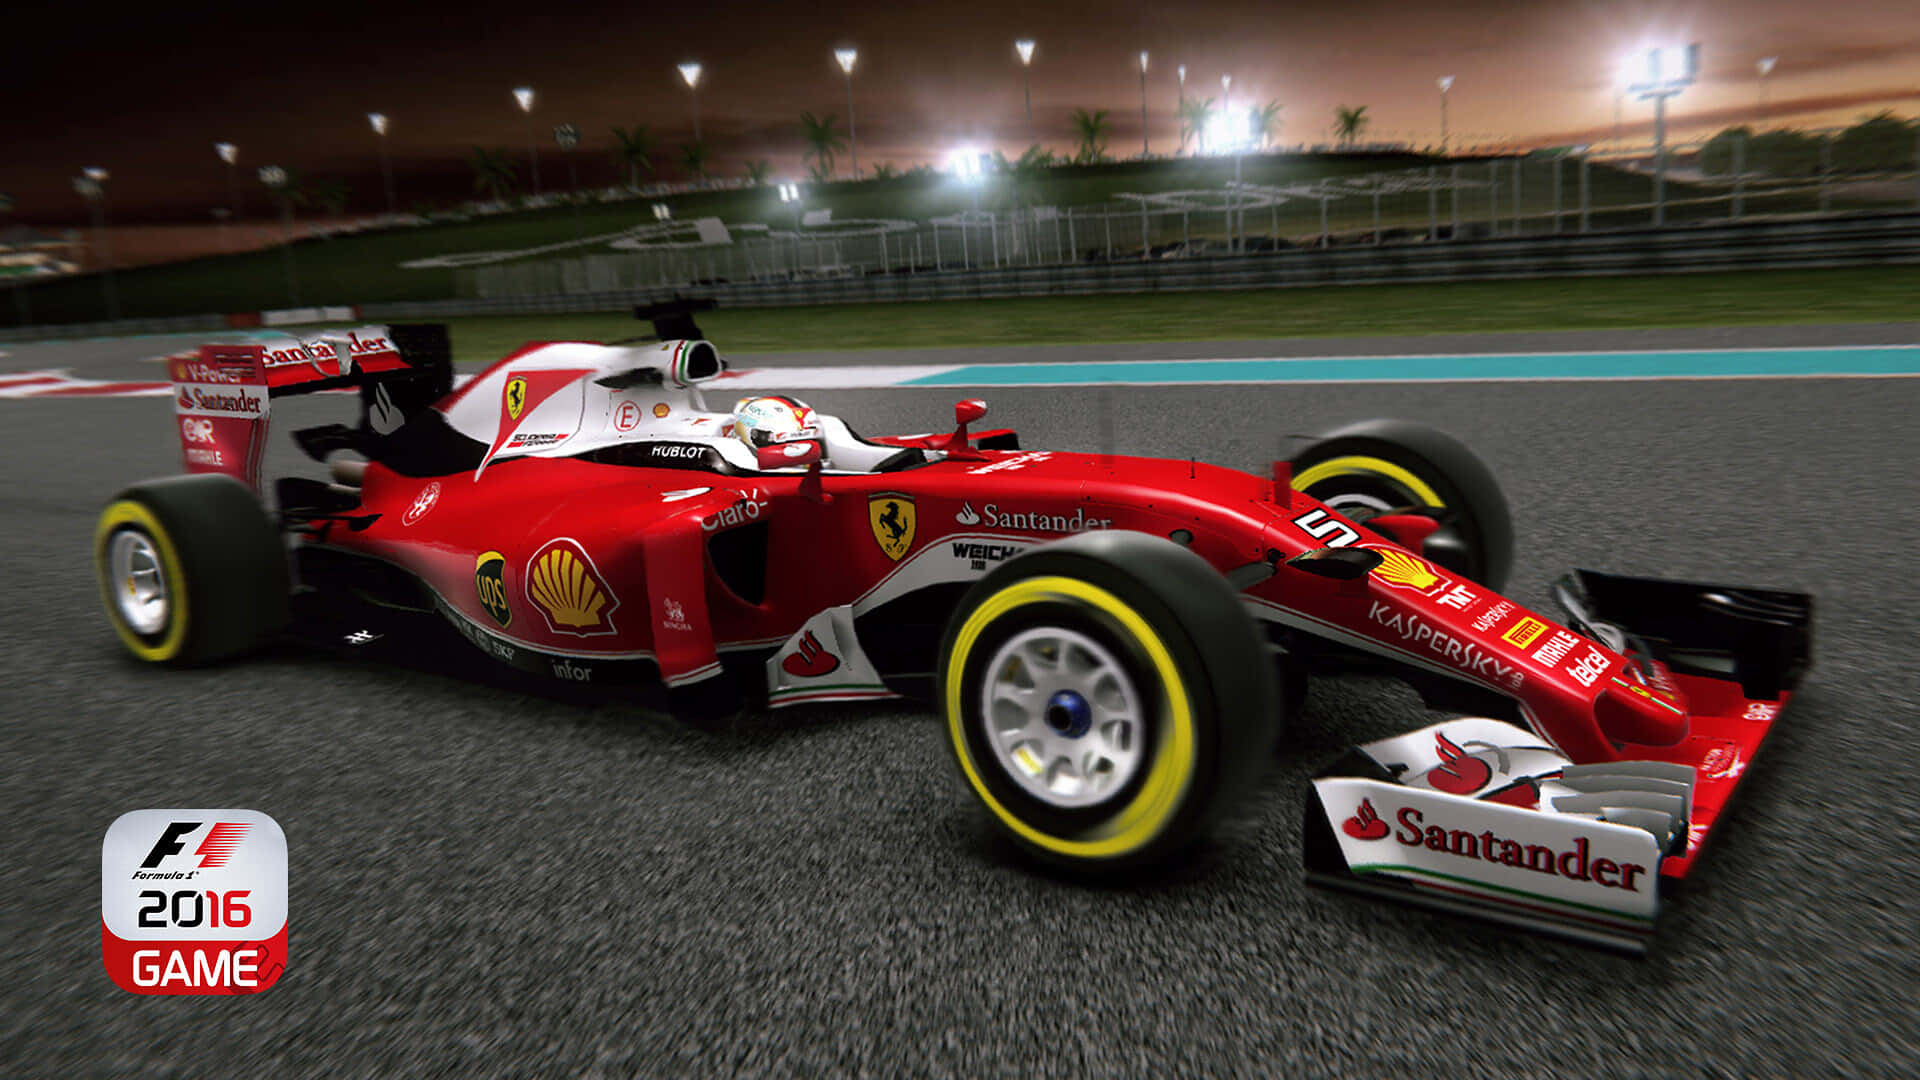 The Ferrari Racing Car Is Driving On The Track